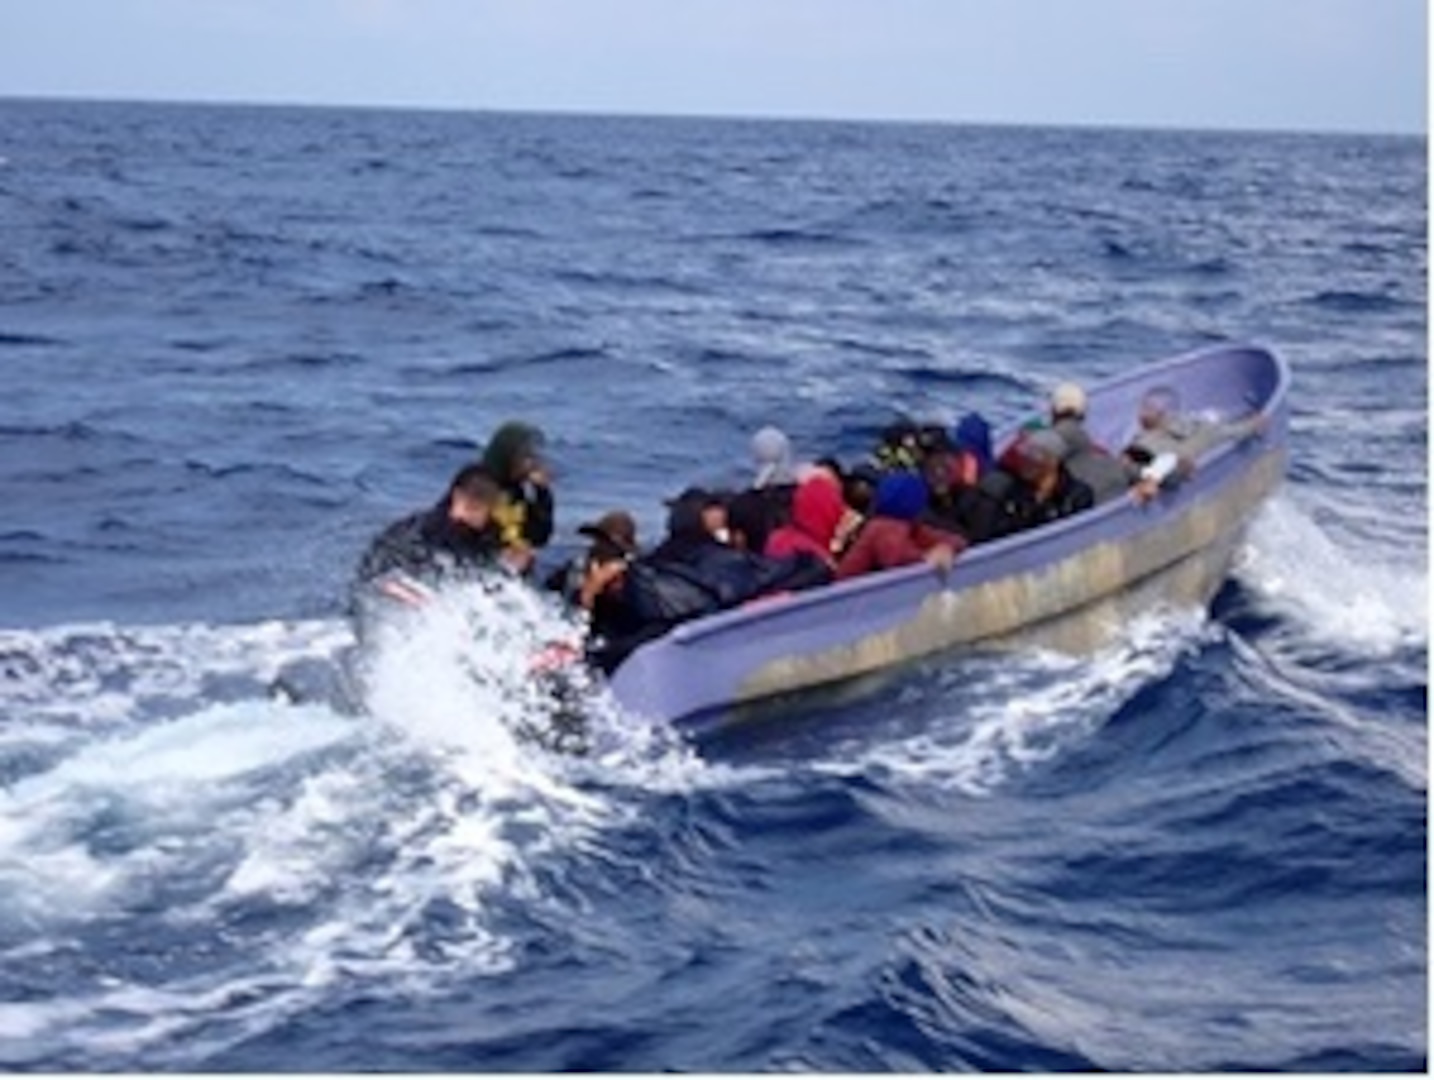 The crew of the Coast Guard Cutter Donald Horsley interdicts a migrant voyage in the Mona Passage Aug. 27, 2023.  Five men interdicted in this group are facing federal prosecution in Puerto Rico, while the remaining 29 migrants were repatriated to the Dominican Republic Aug. 28, 2023. The Coast Guard, along with its Homeland Security Task Force – Southeast partners, maintains a continual presence with air, land, and sea assets in the Florida Straits, the Windward Passage, the Mona Passage and the Caribbean Sea. The HSTF-SE combined, multi-layered approach is designed to protect the safety of life at sea while preventing unlawful maritime entry to the United States and its territories. (U.S. Coast Guard photo)